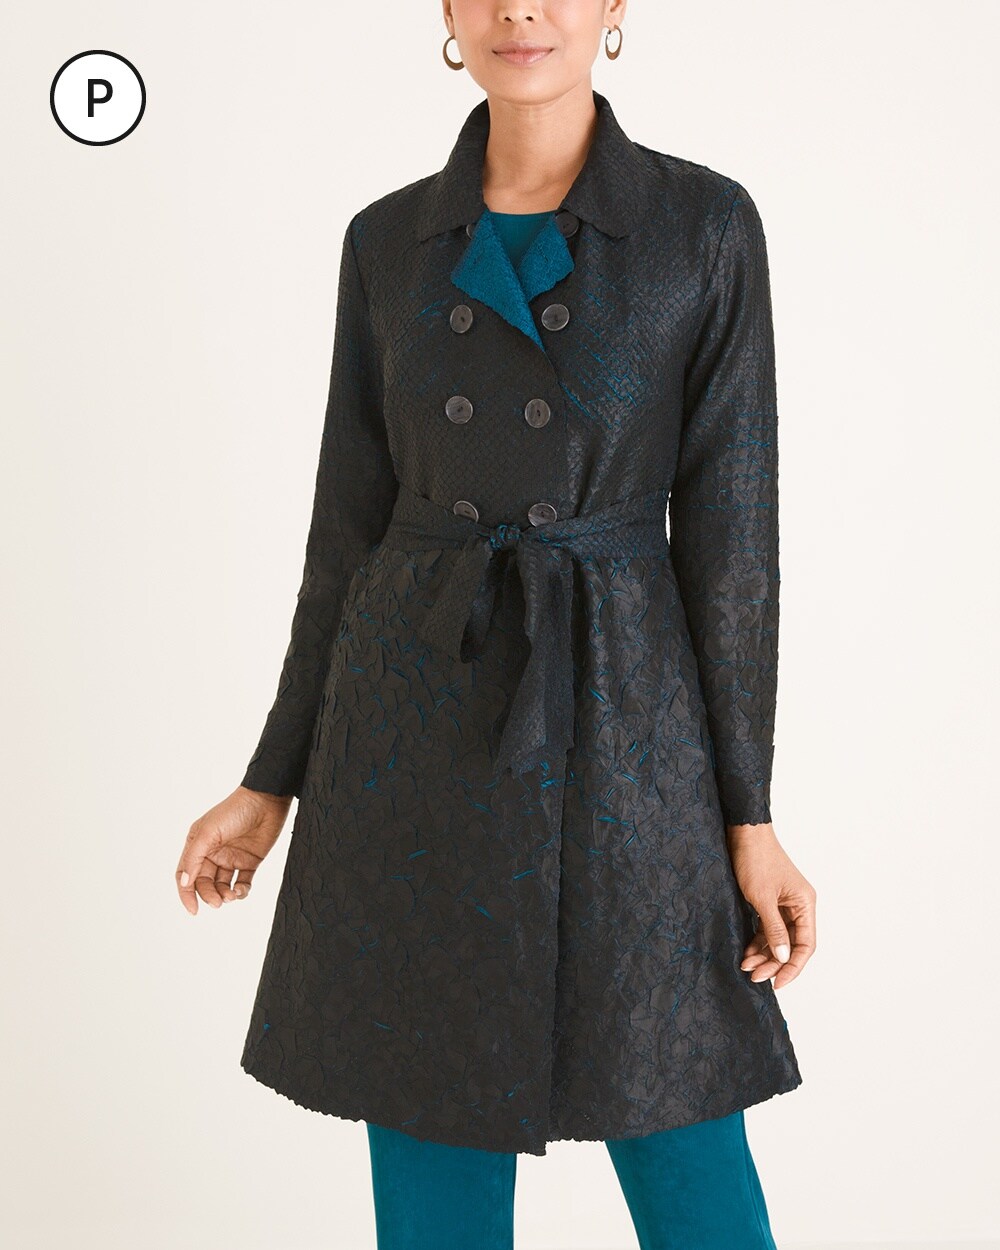 Travelers Collection Petite Crushed Trench Coat